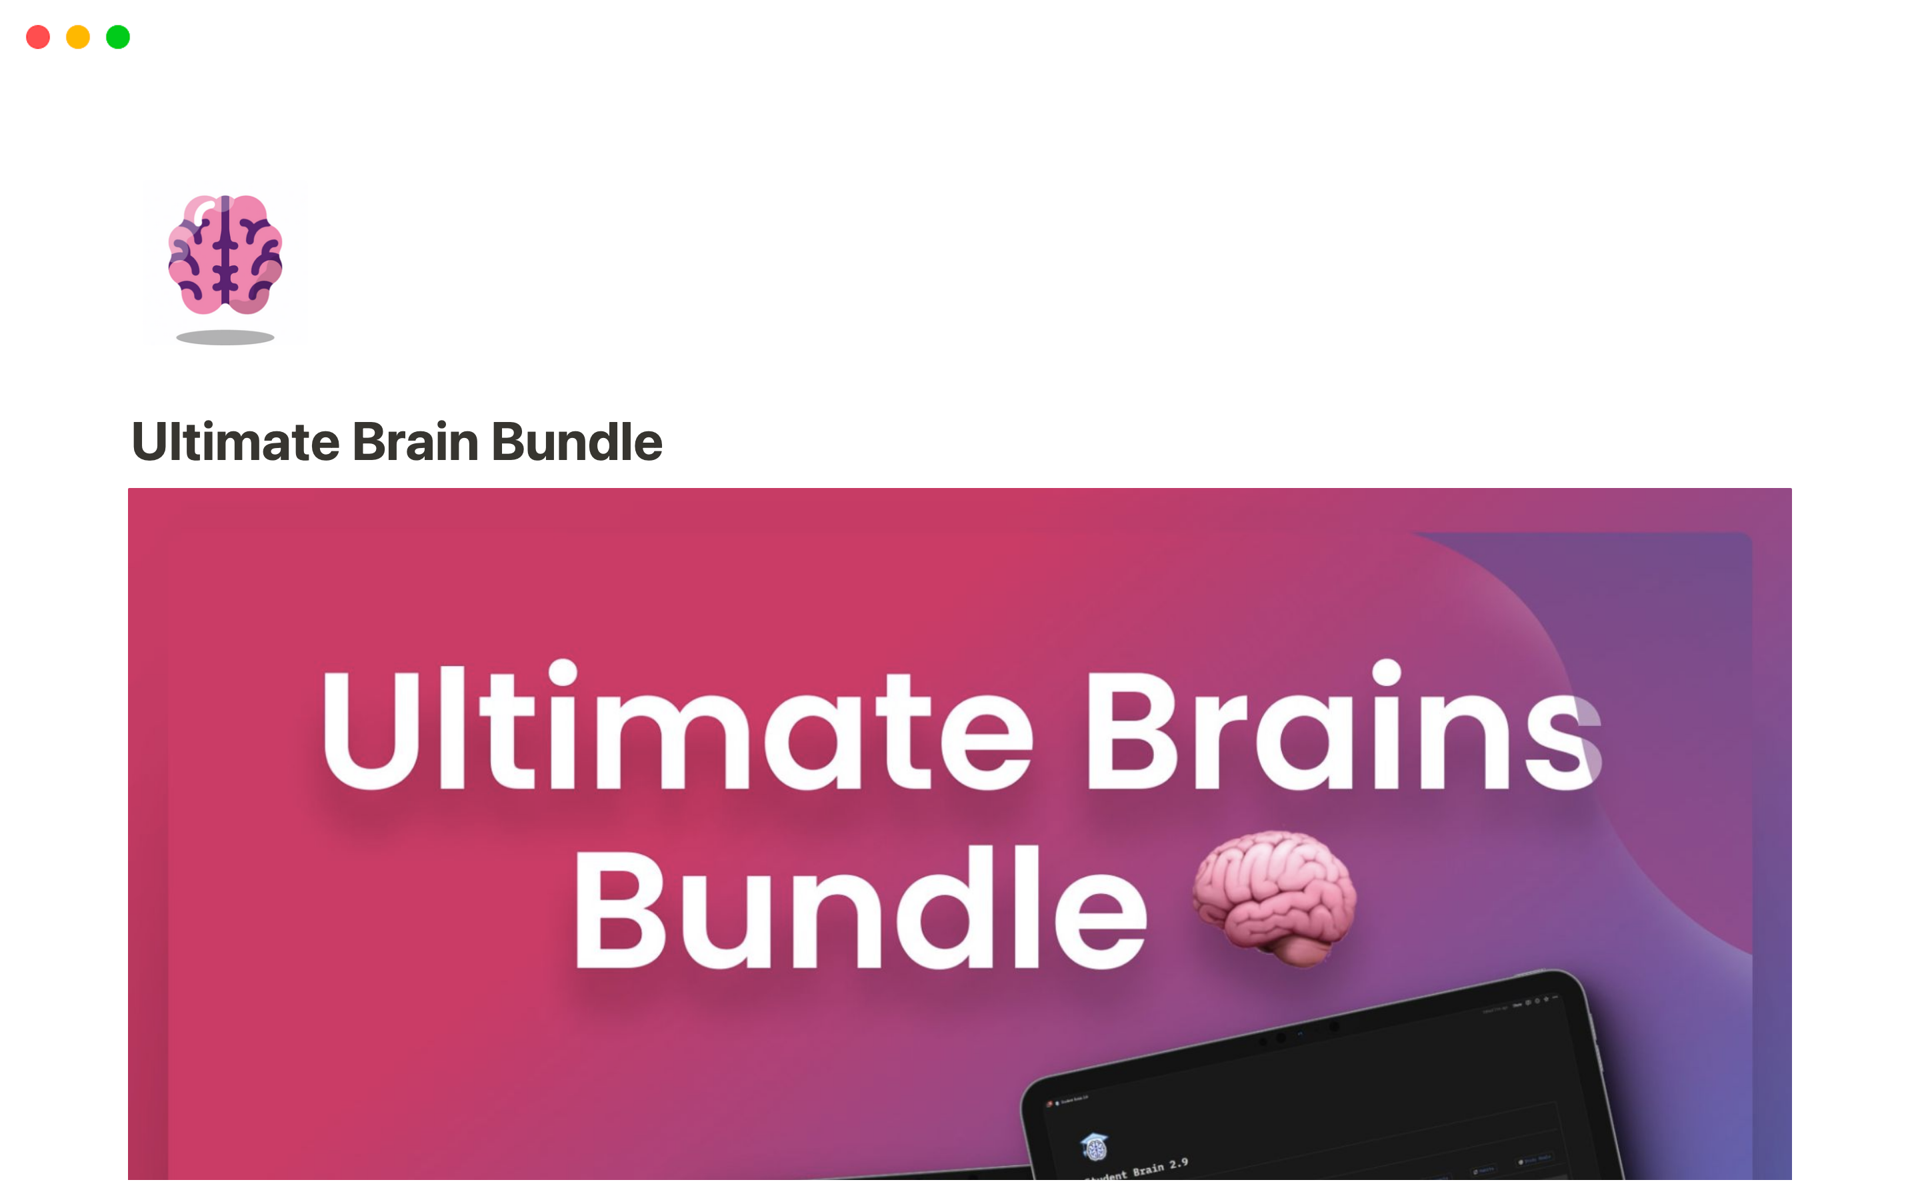 This Bundle include 7 Big templates:
- Second Brain 2.0
- Student Brain 2.9
- Creator Brain 3.0
- Finance Brain
- Summer Board
- Goals tracker system 2.0
- CreatorOS

And My Premium Notion covers and wallpapers